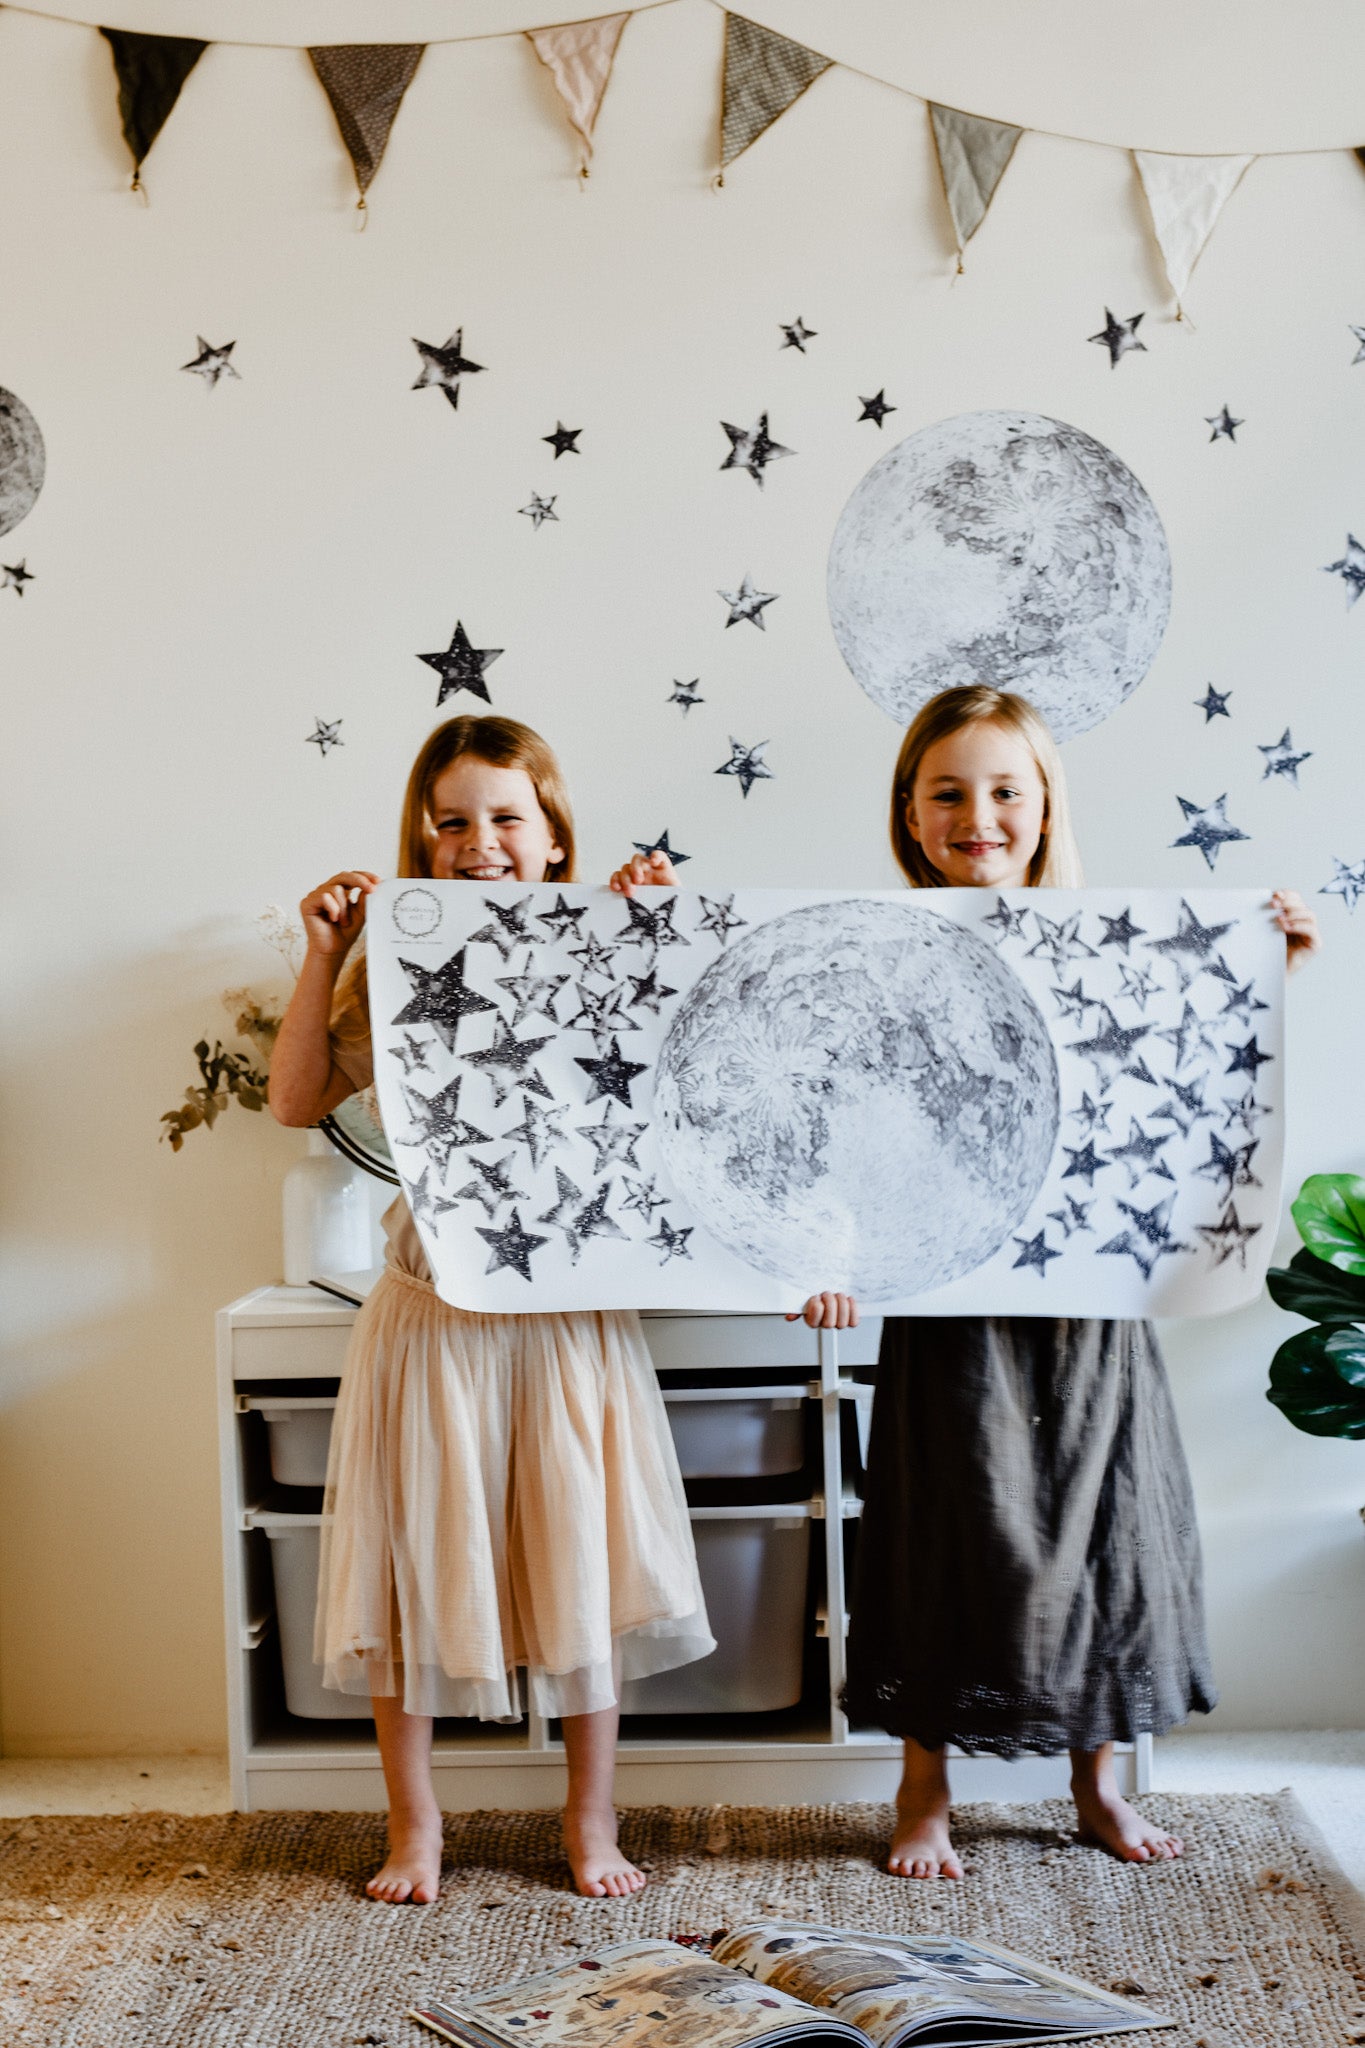 The Moon and Stars Collection - Original & Super Moon - Fabric Wall Decals